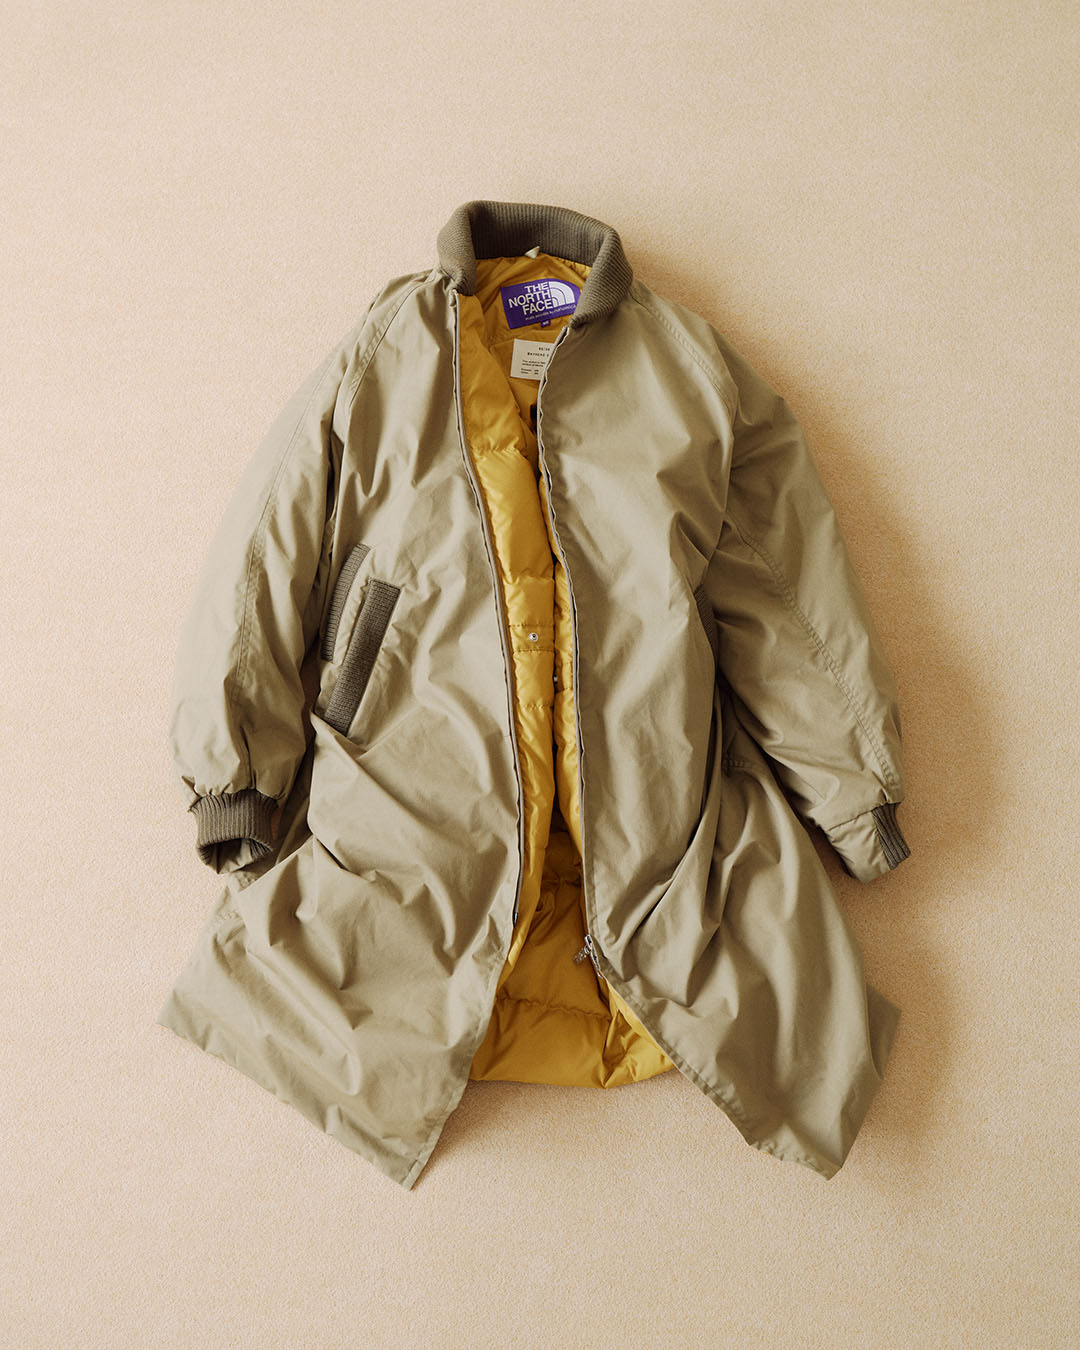 nanamica / THE NORTH FACE PURPLE LABEL / Featured Product vol.61